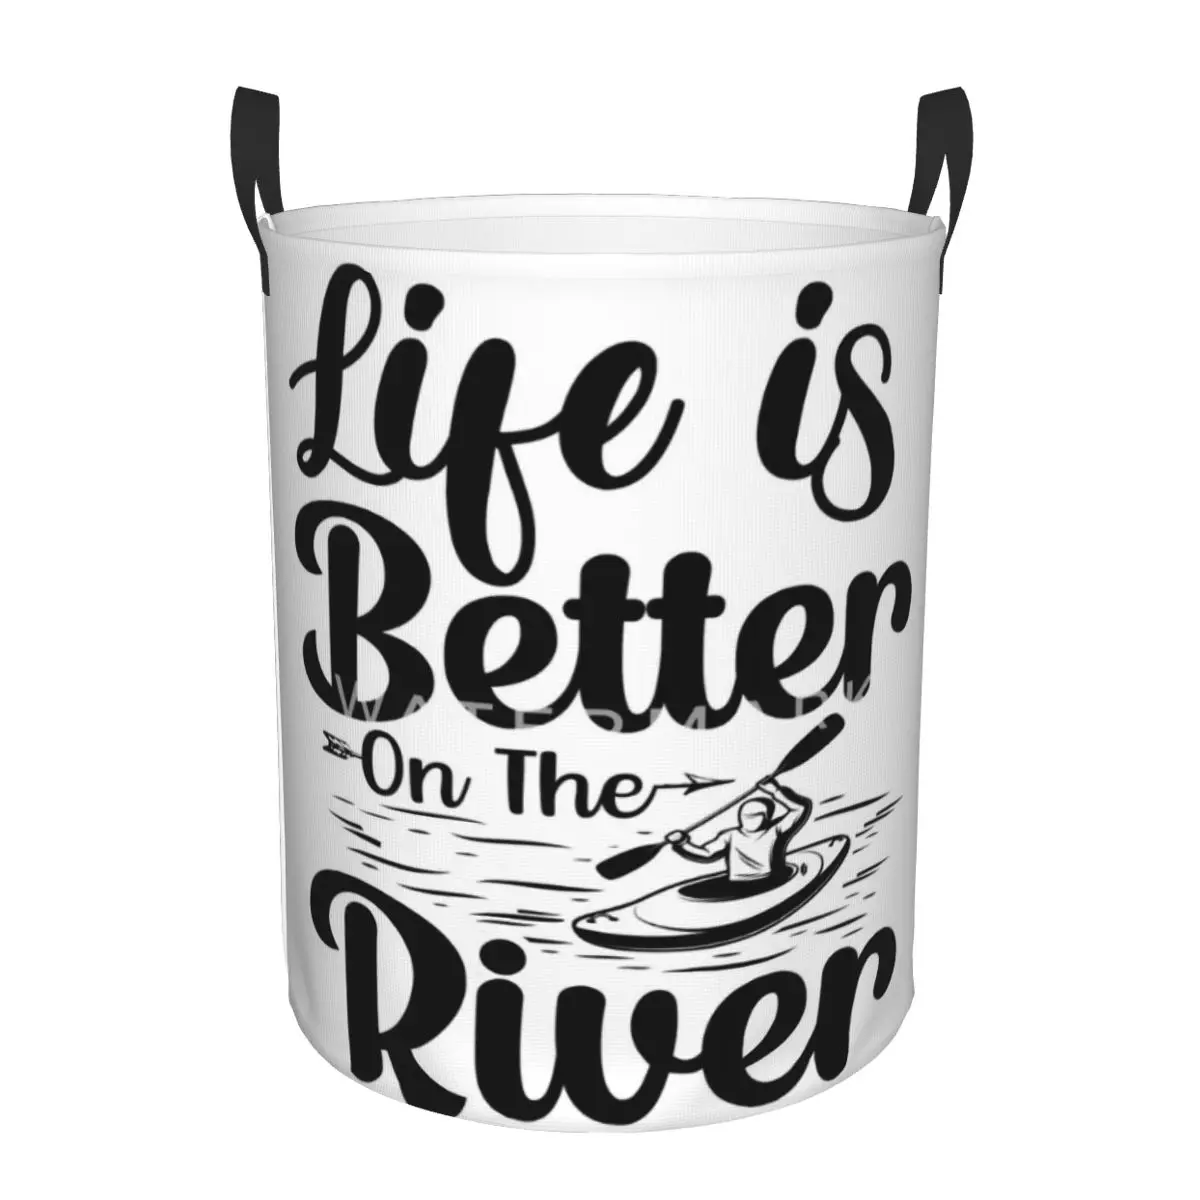 

Life Is Better On The River, River Lover Circular hamper,Storage Basket Sturdy and durableGreat for kitchensStorage of clothes